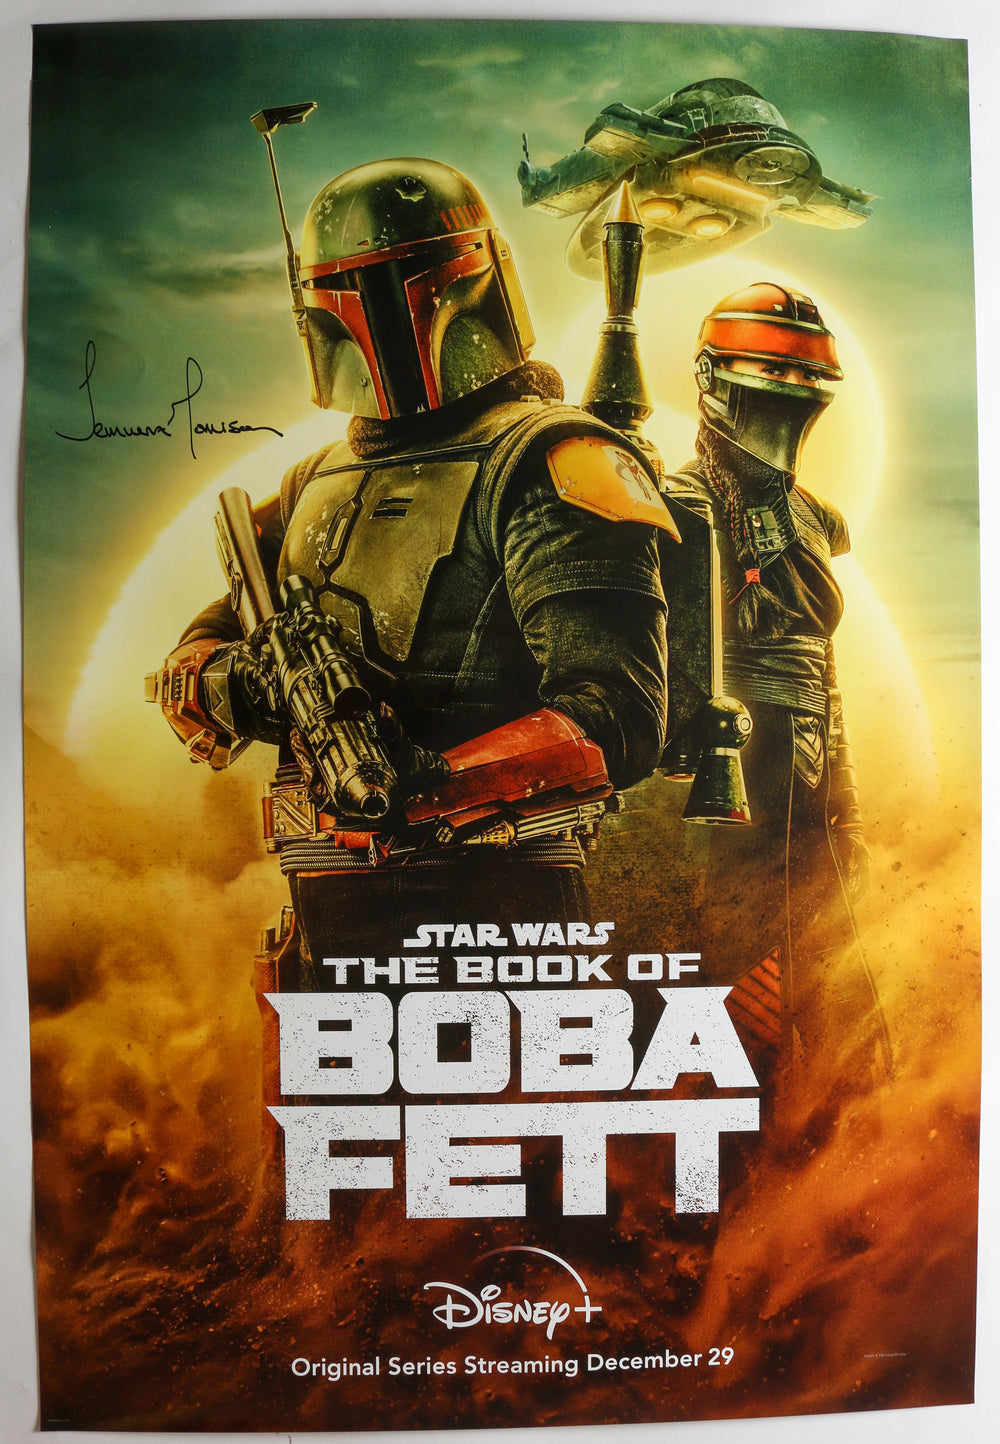 Temuera Morrison as Boba Fett in Star Wars: The Book of Boba Fett (SWAU) Signed 27x40 Poster